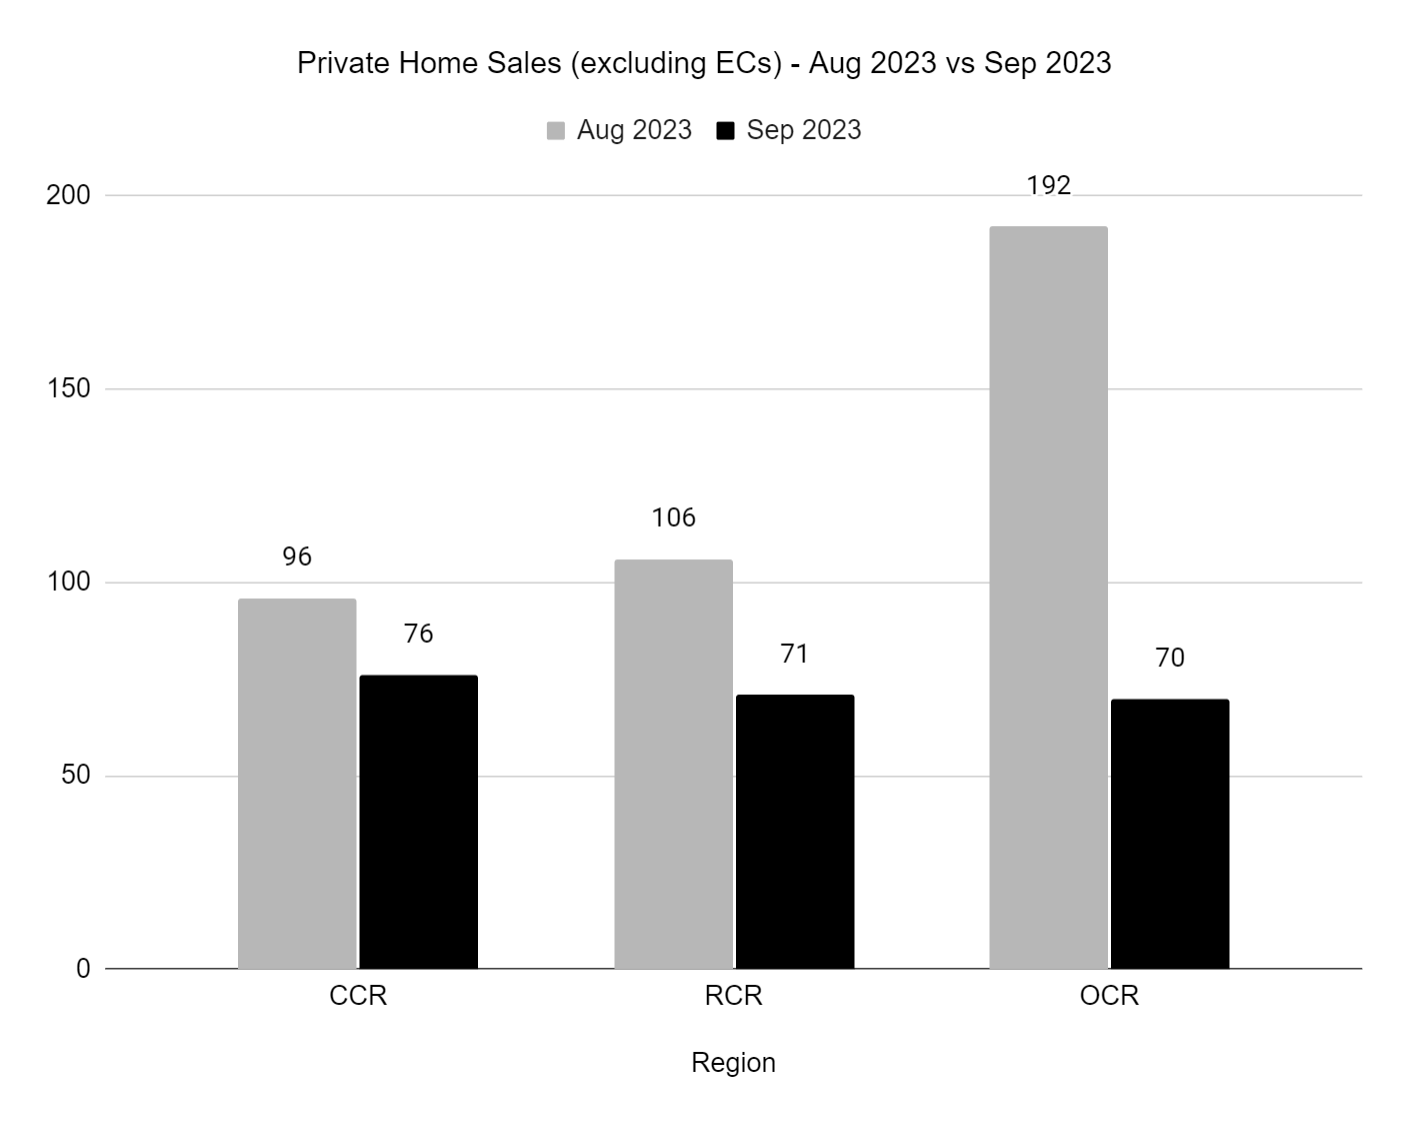 Private Condo Sales between Aug 2023 and Sept 2023